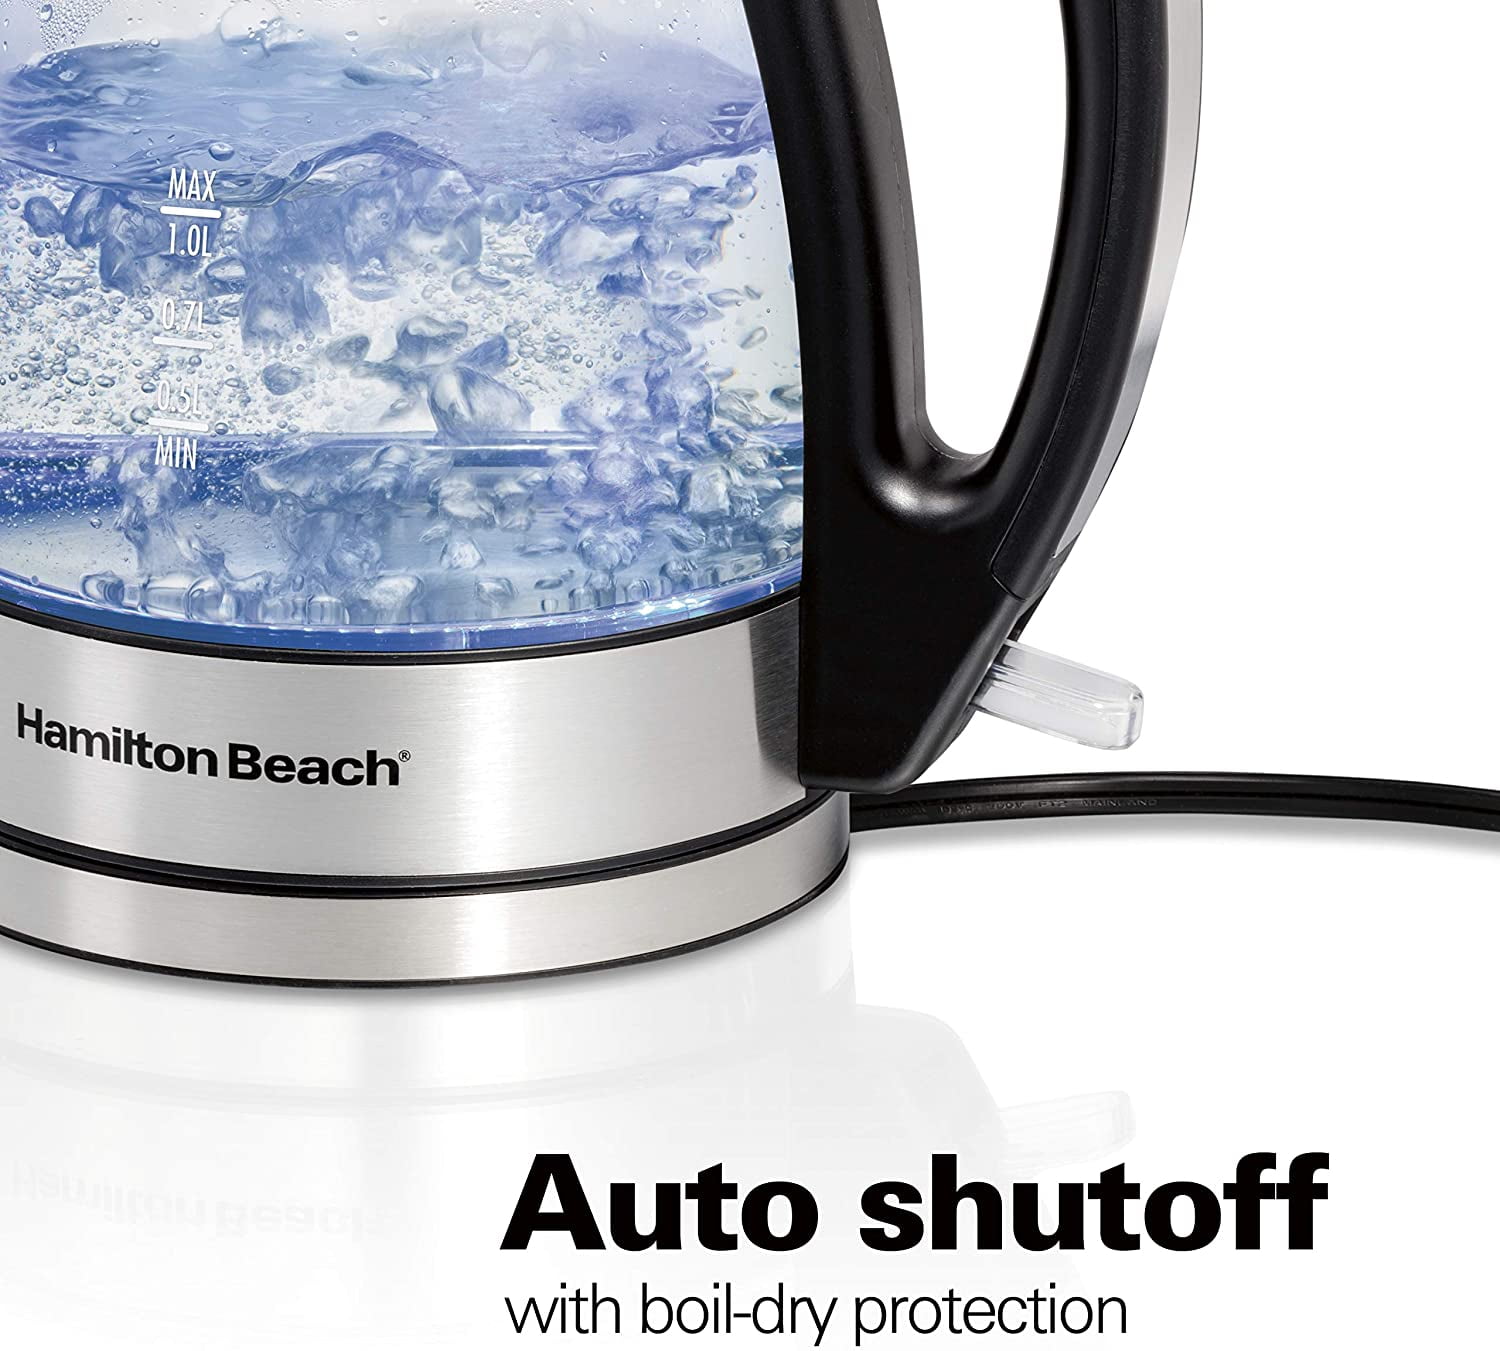  Hamilton Beach Smart Electric Tea Kettle & Water Boiler, Works  with Alexa, 1.7 Liter, Fast Boiling 1500 Watts, Cordless, Keep Warm,  Auto-Shutoff & Boil-Dry Protection, Stainless Steel (41036): Home & Kitchen